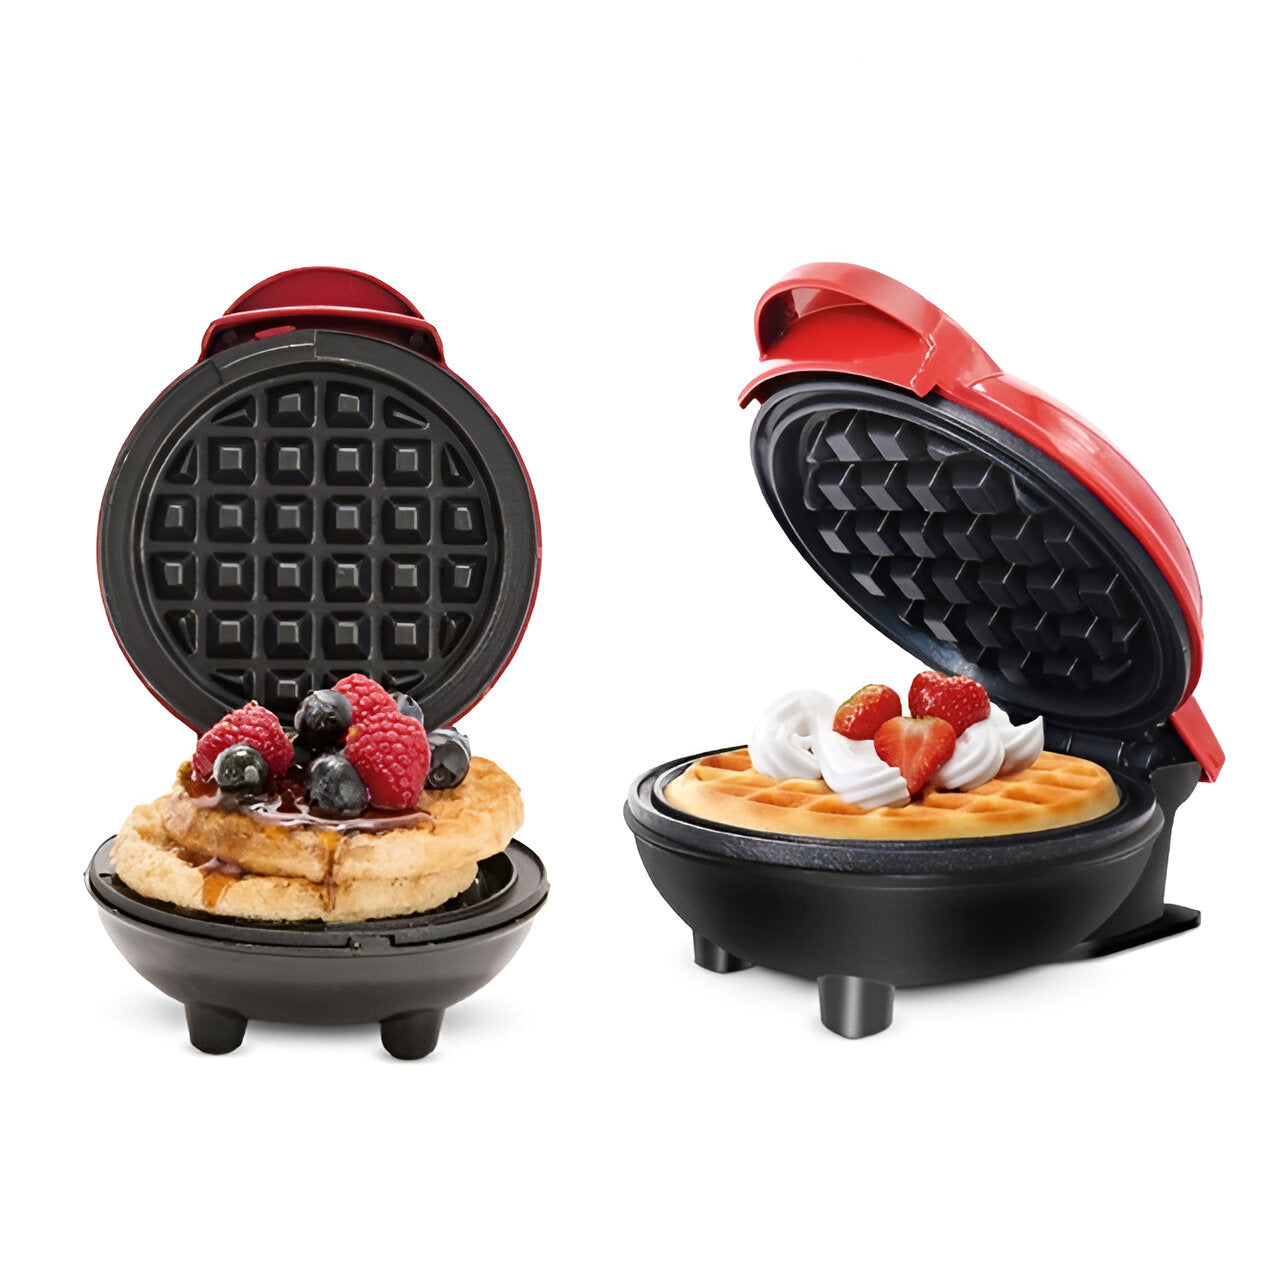 110-220 V Kitchen Cooking Appliance 350 W Non-Stick Electric Waffle Machine